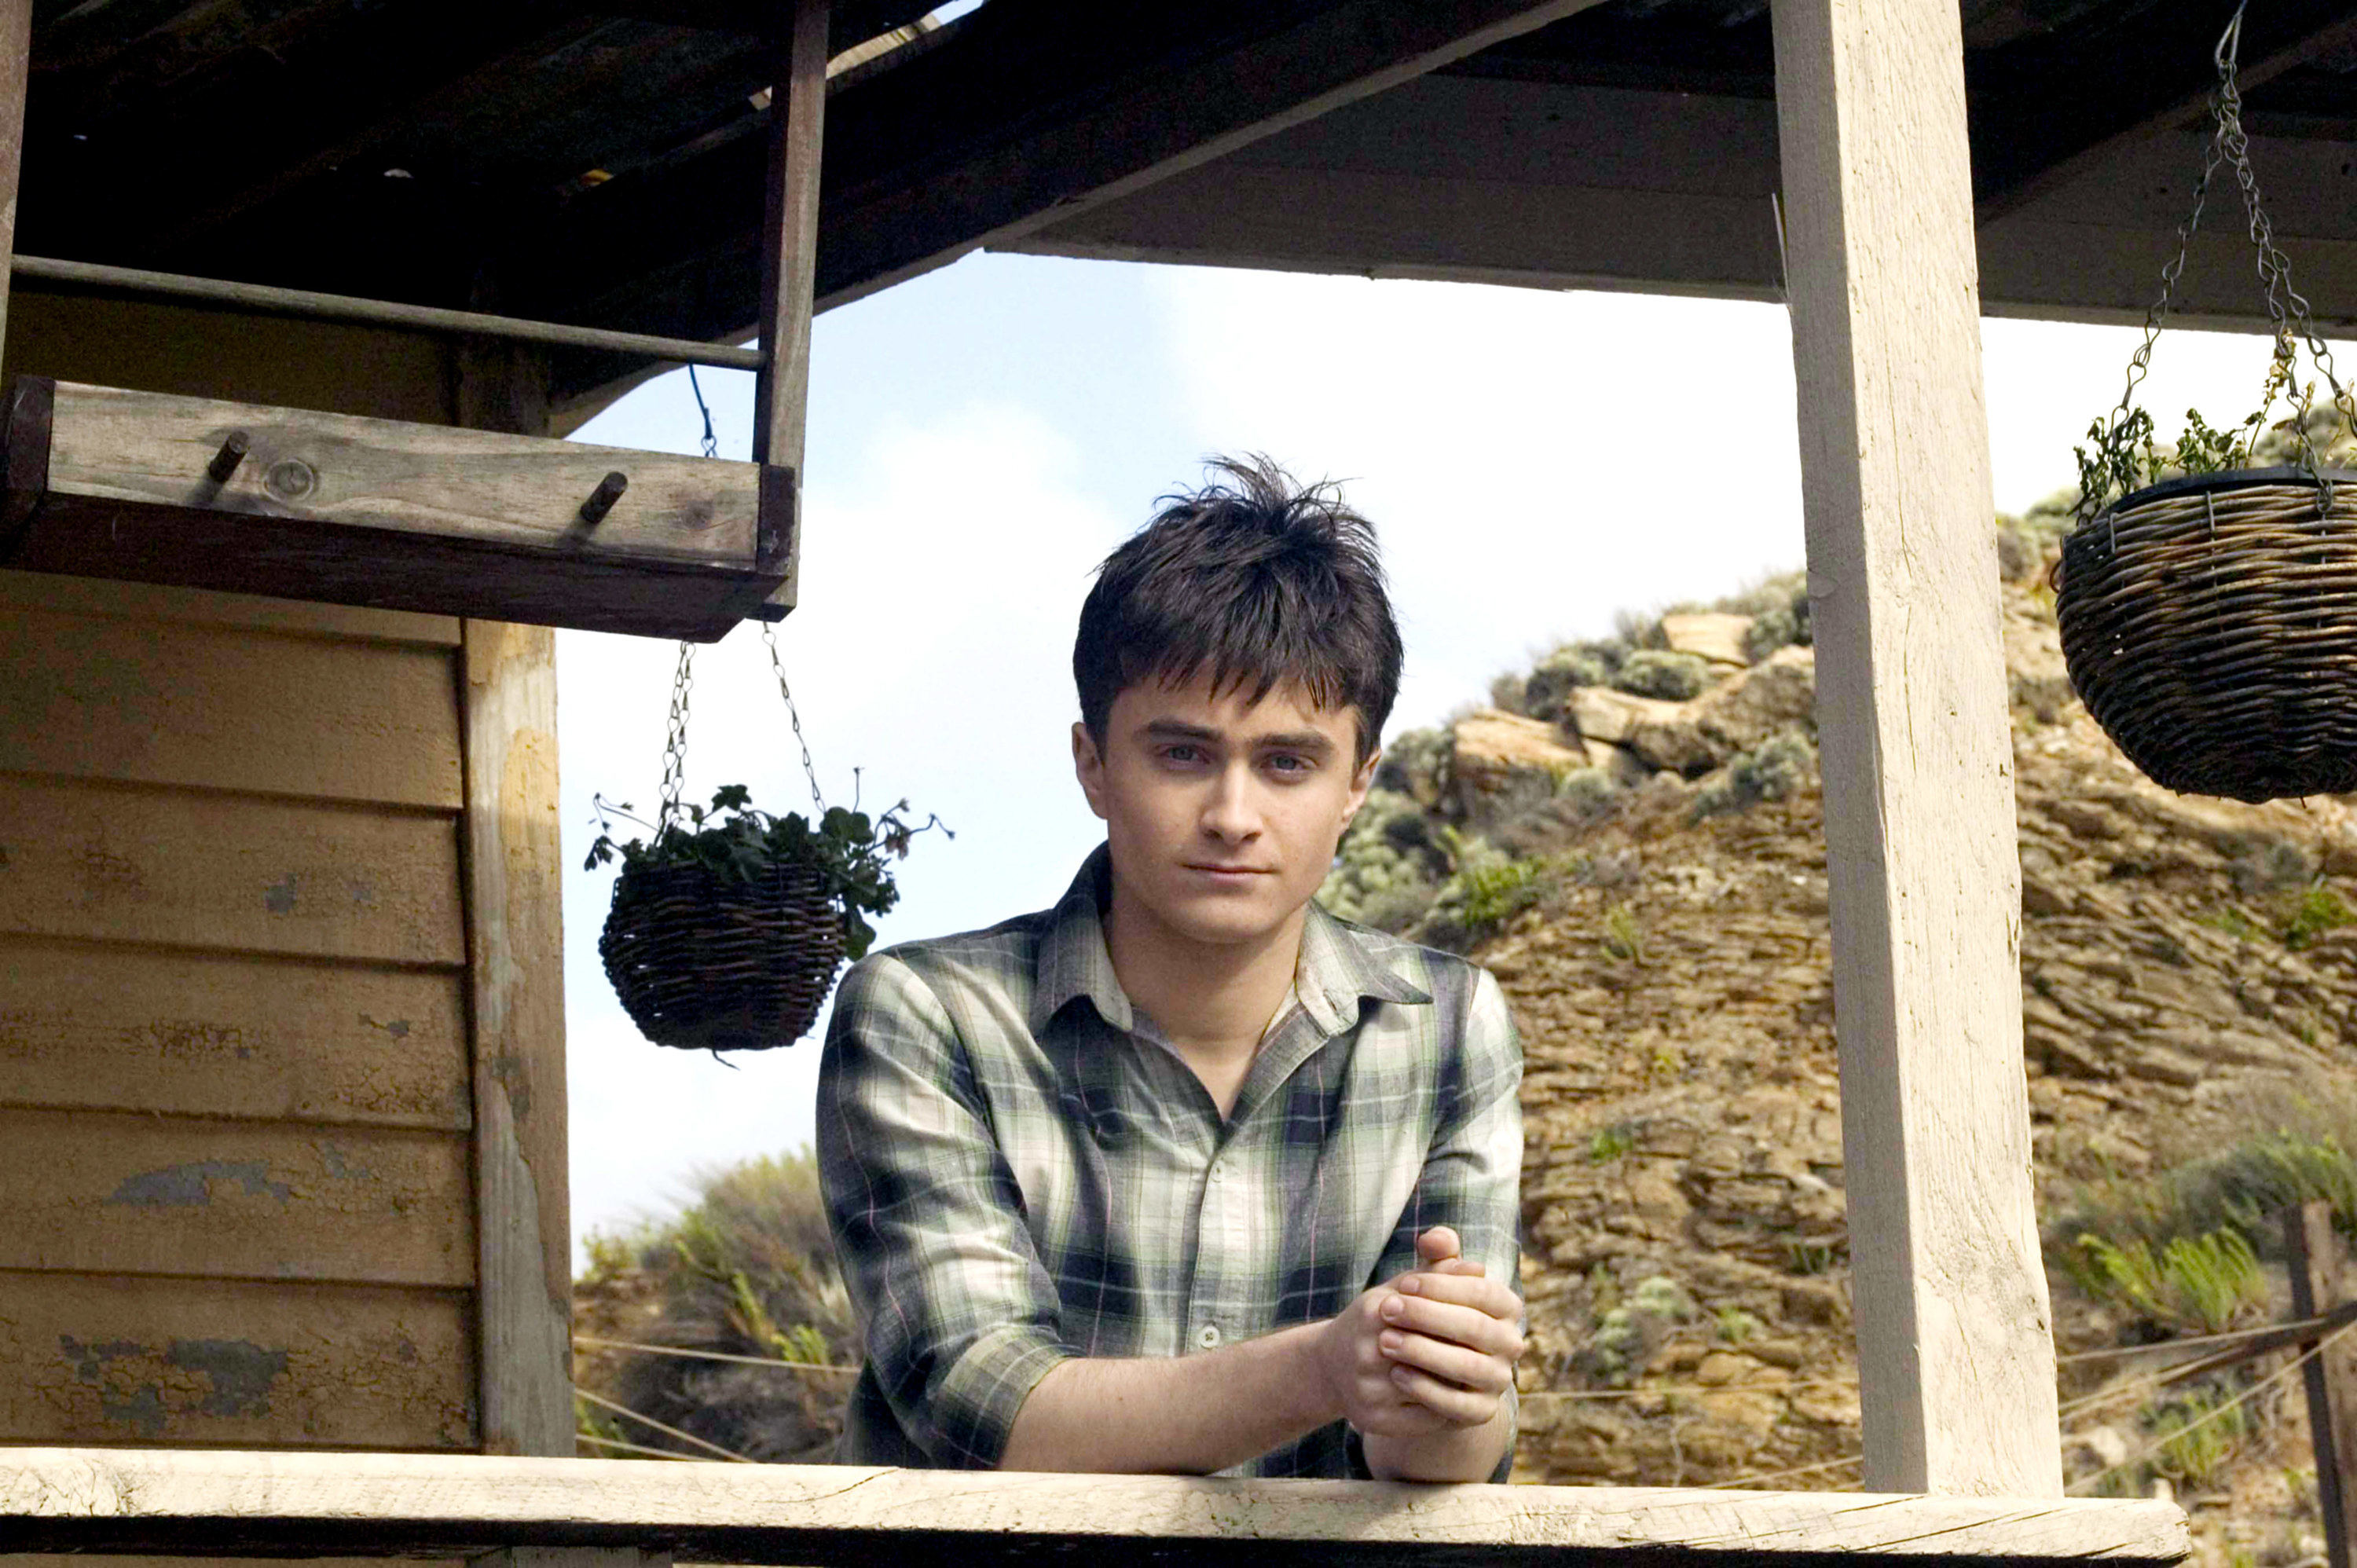 Daniel Radcliffe leans against the railing of a beach house wearing a light colored flannel shirt